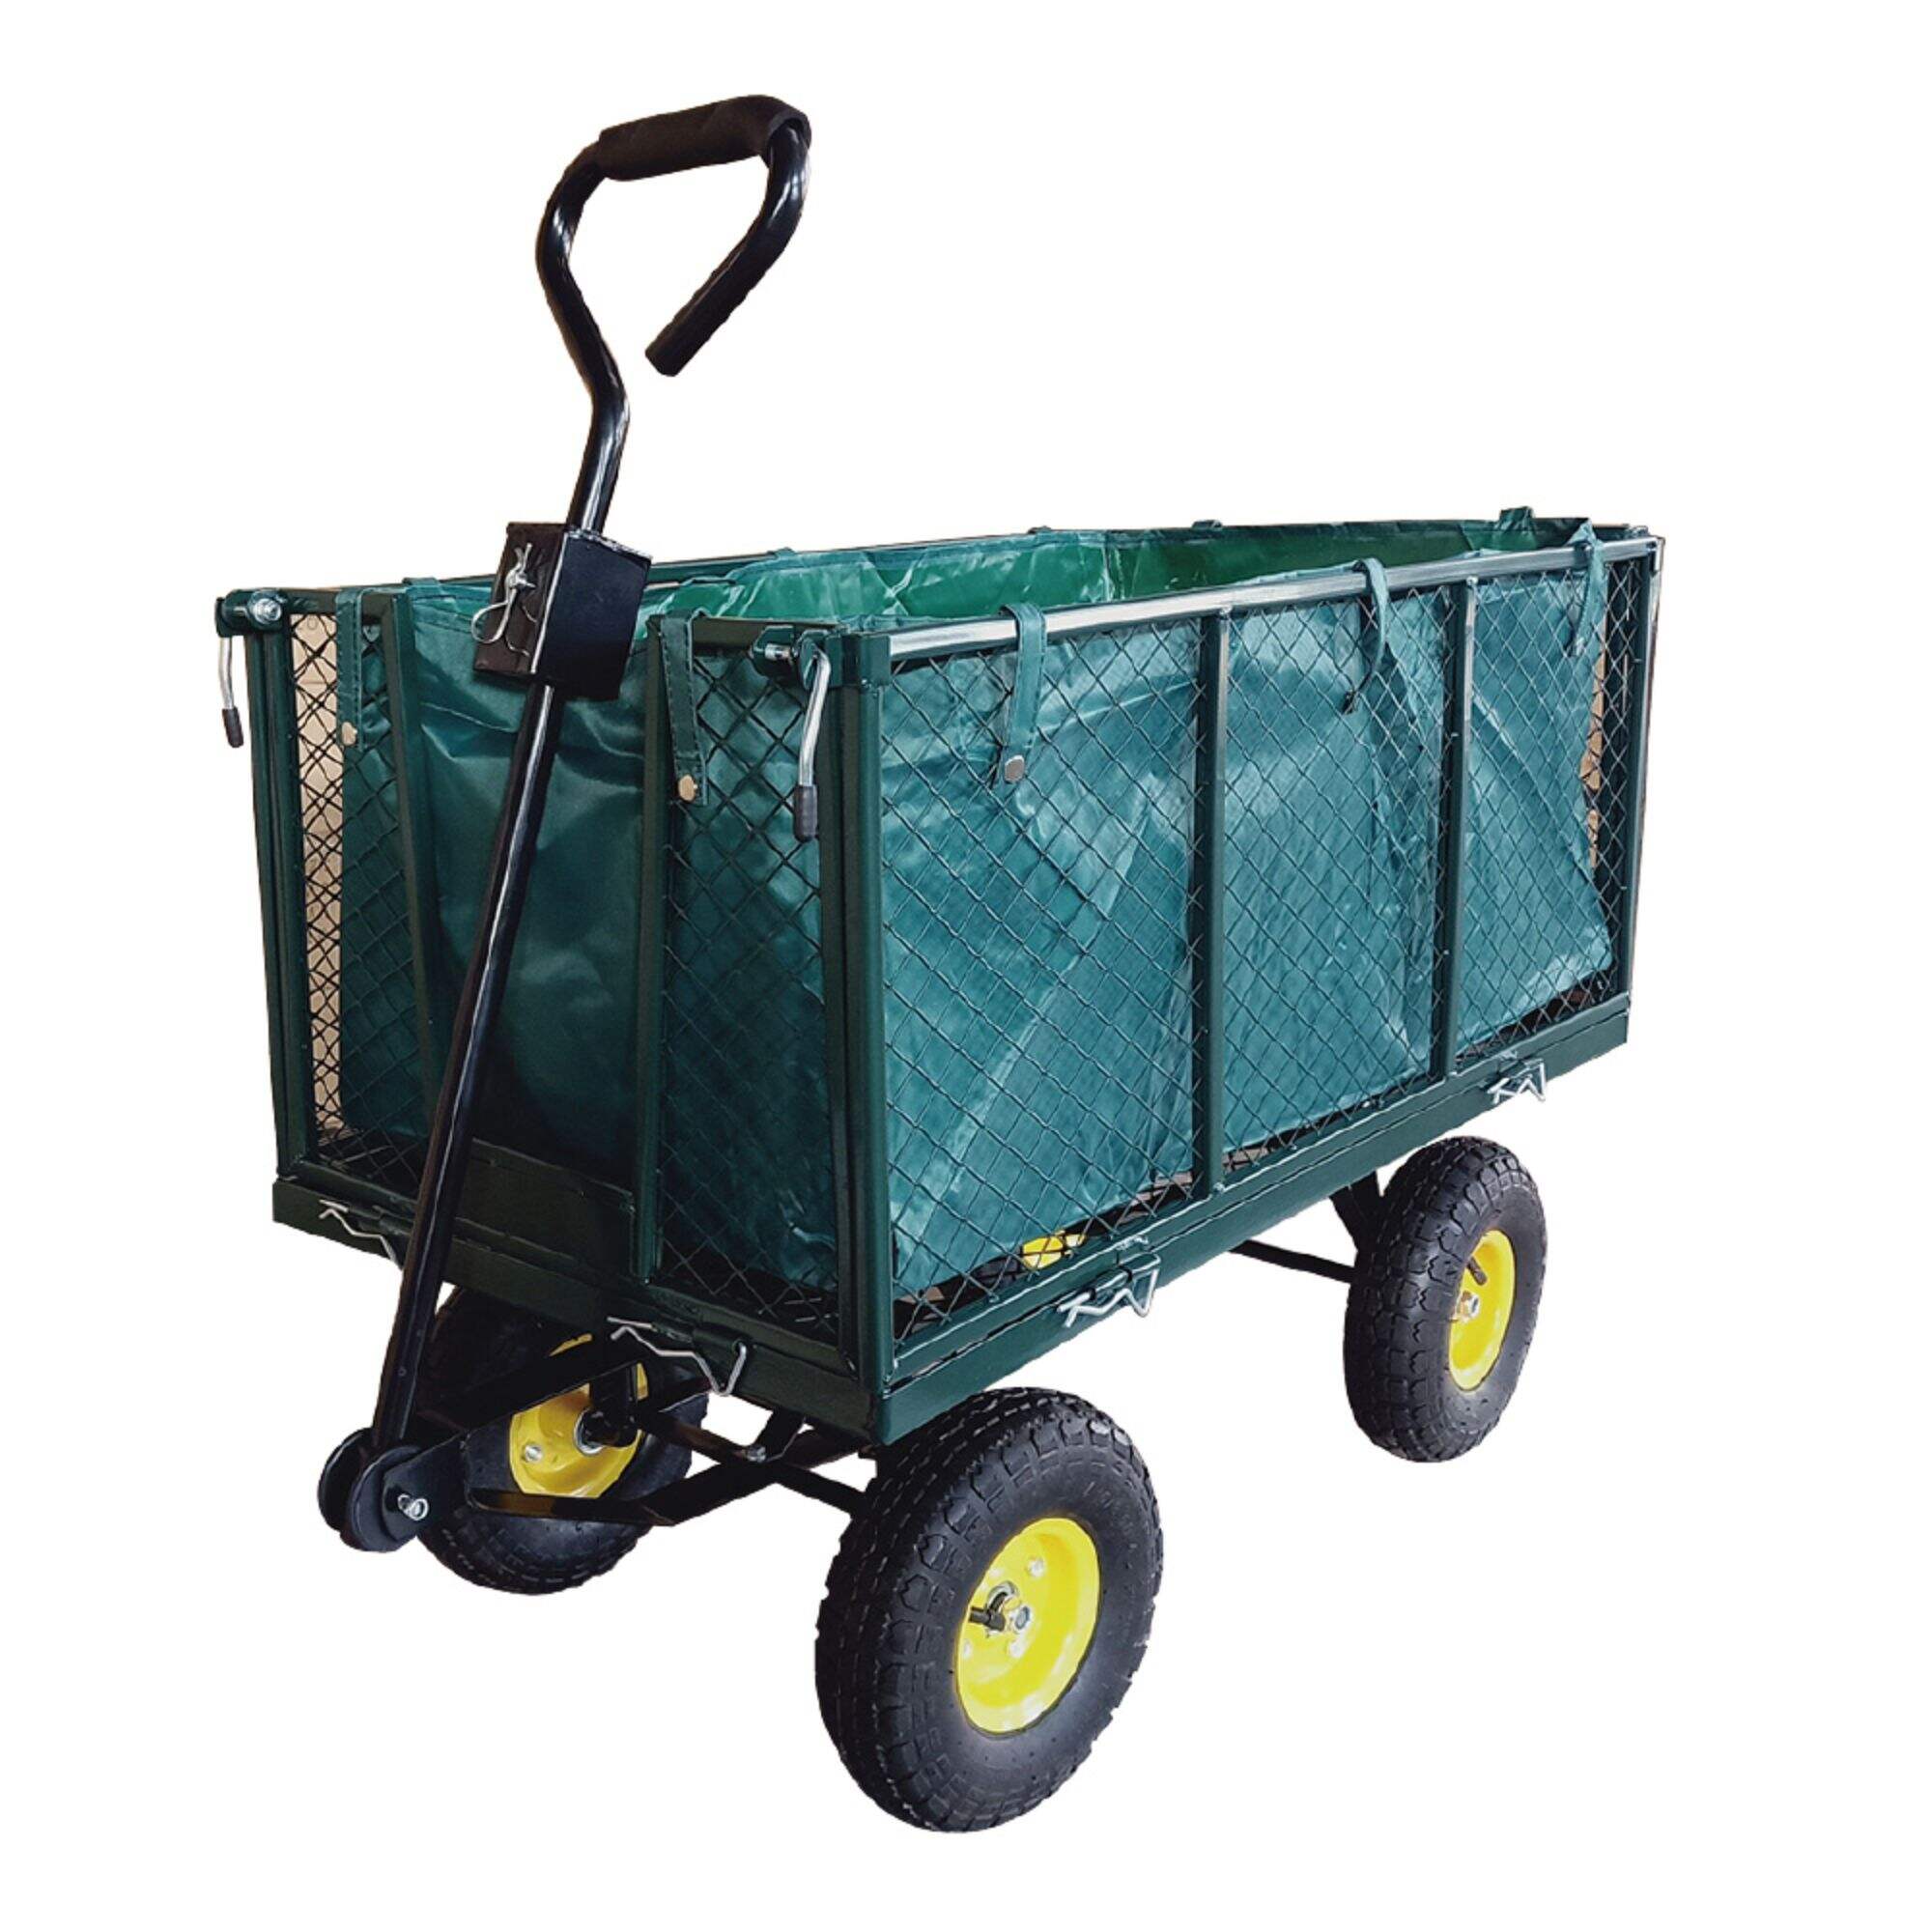 TC1840H Mesh Steel Garden Trolley Cart, Folding Utility Wagon, with Removable Sides, 10 Inch 3.50-4 Pneumatic Wheel, 500KG Capacity